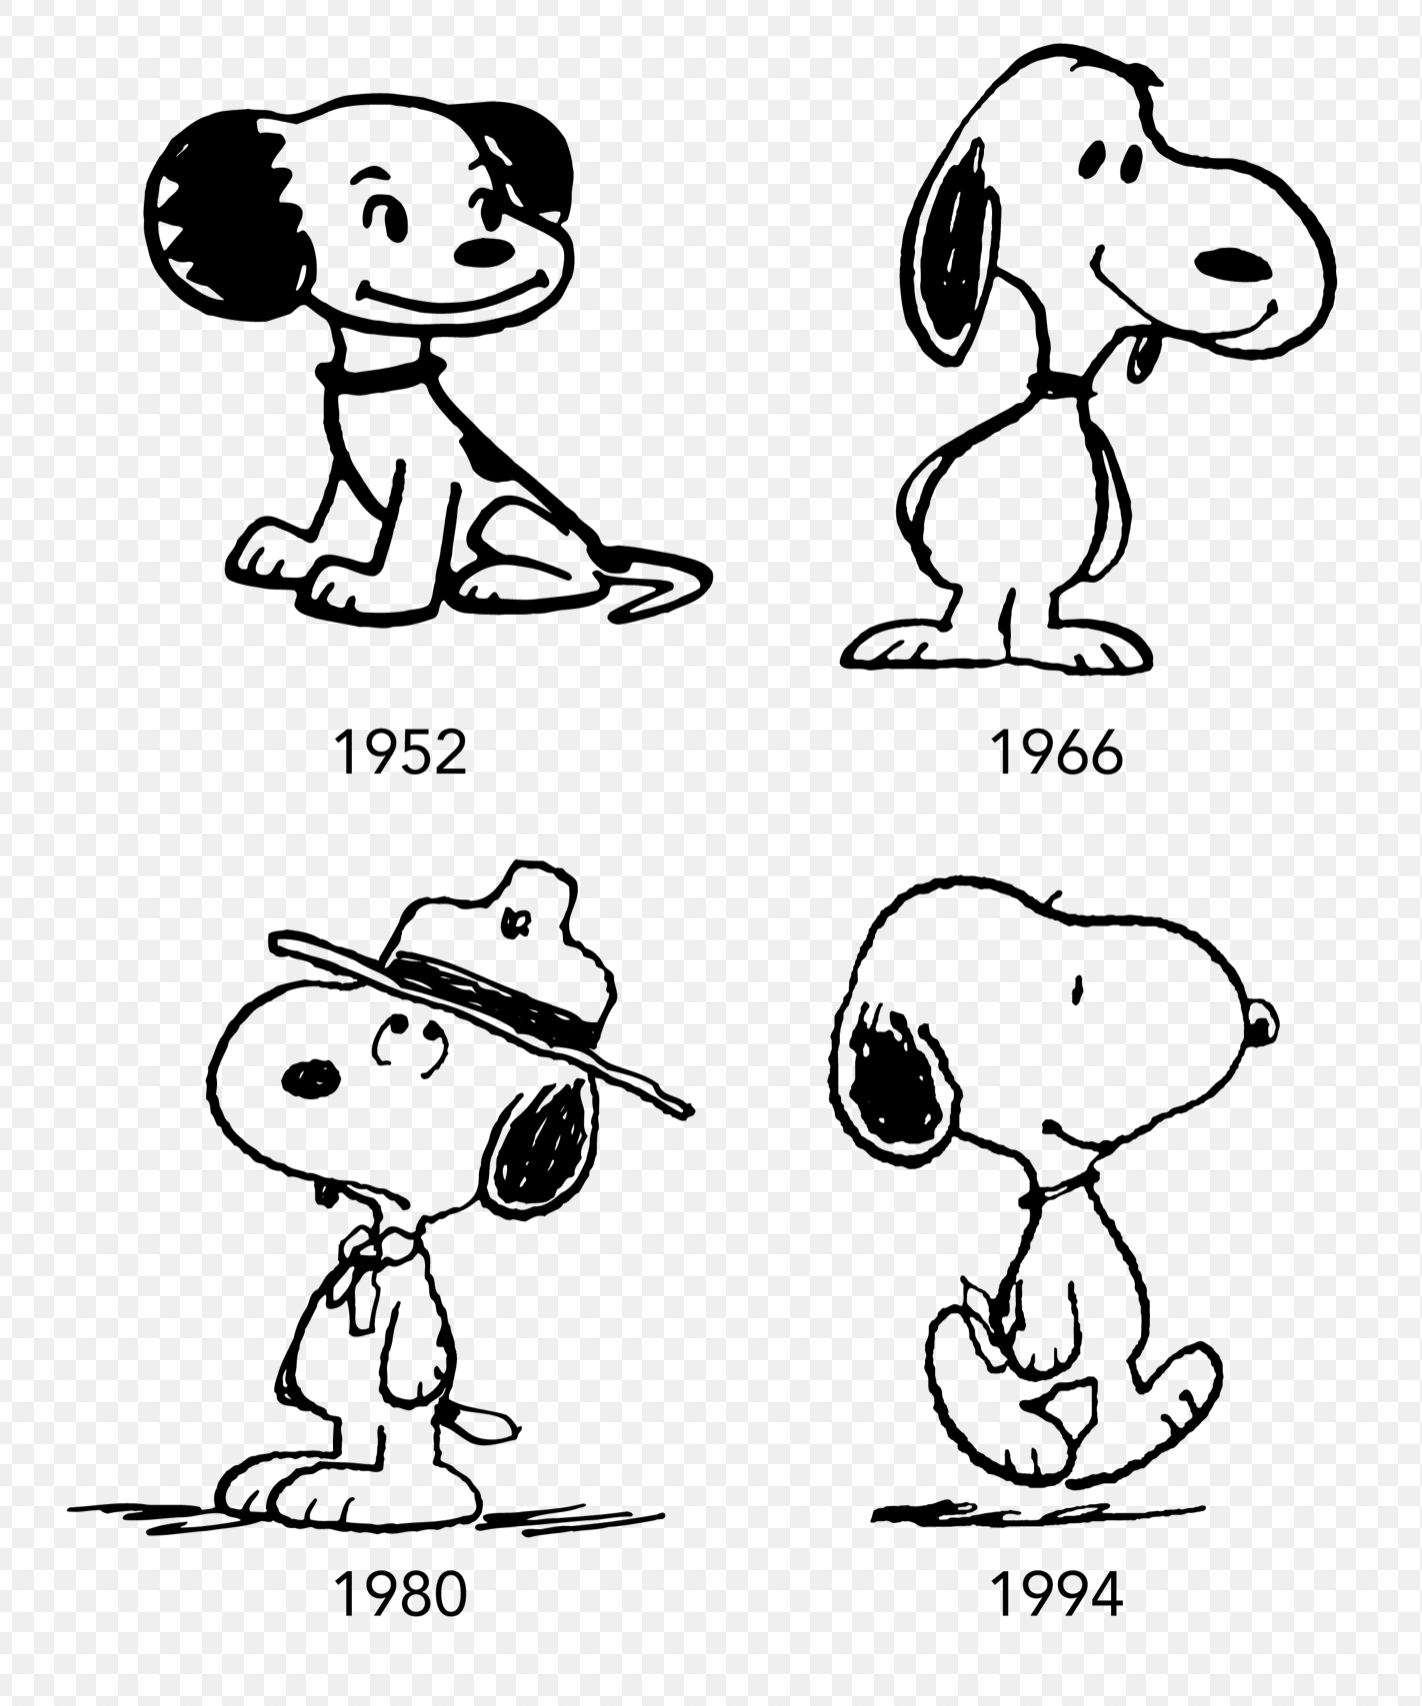 Black and white beagle snoopy